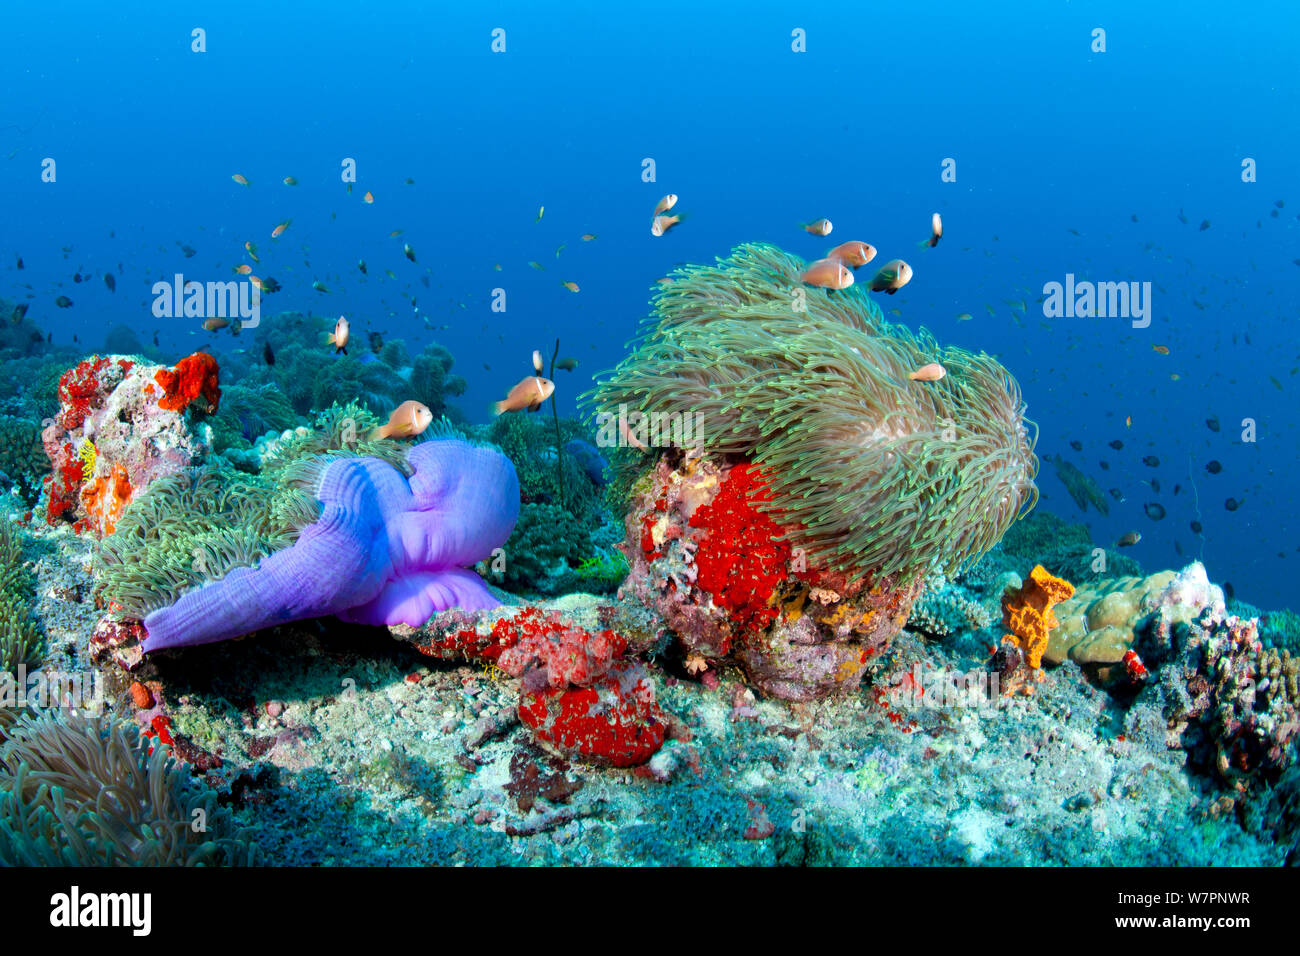 Magnificent Sea anemone (Heteractis magnifica) with Blackfoot anemonefish (Amphiprion nigripes) Maldives, Indian Ocean Stock Photo